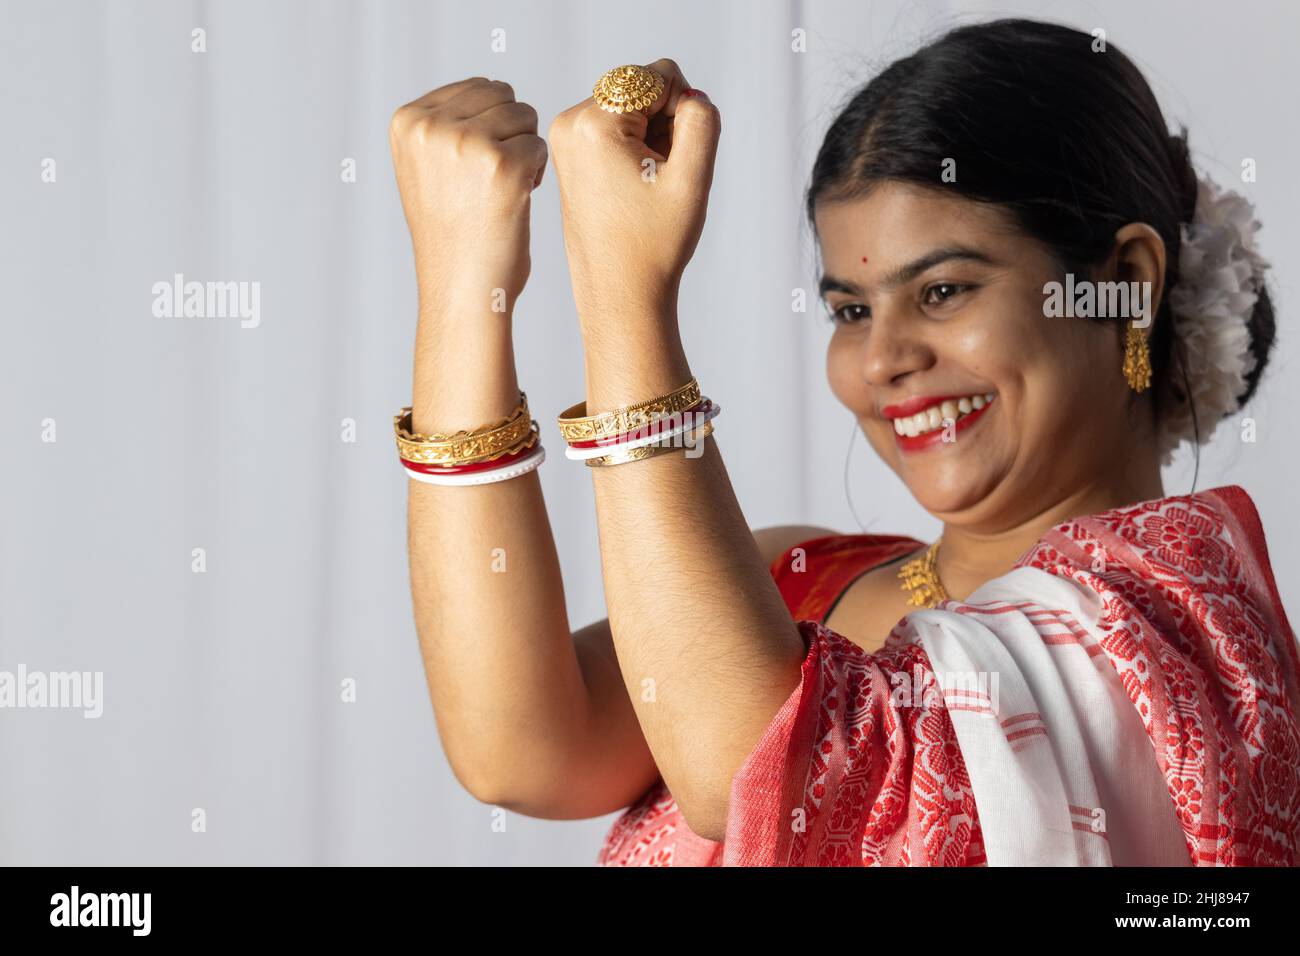 Selective focus on hands of an Indian woman in red saree wearing bangles with smiling face on white background Stock Photo